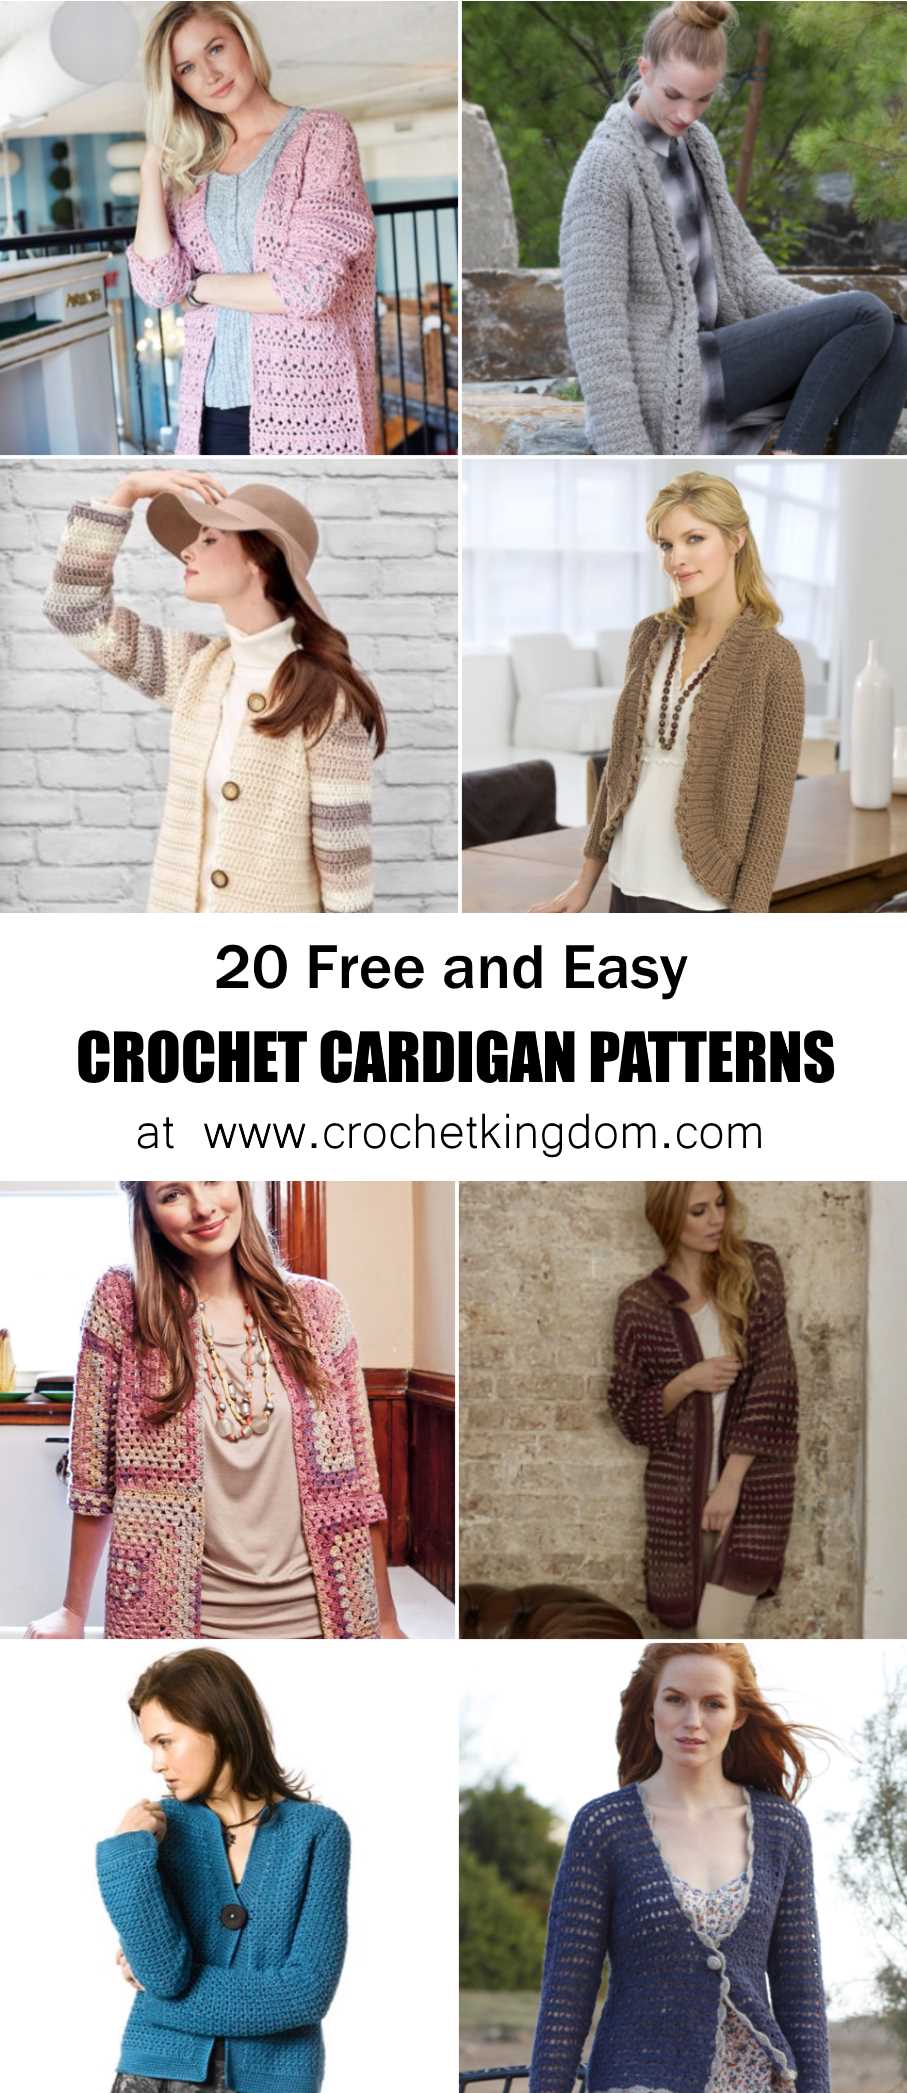 20 Free and Easy Crochet Cardigan Patterns for Women